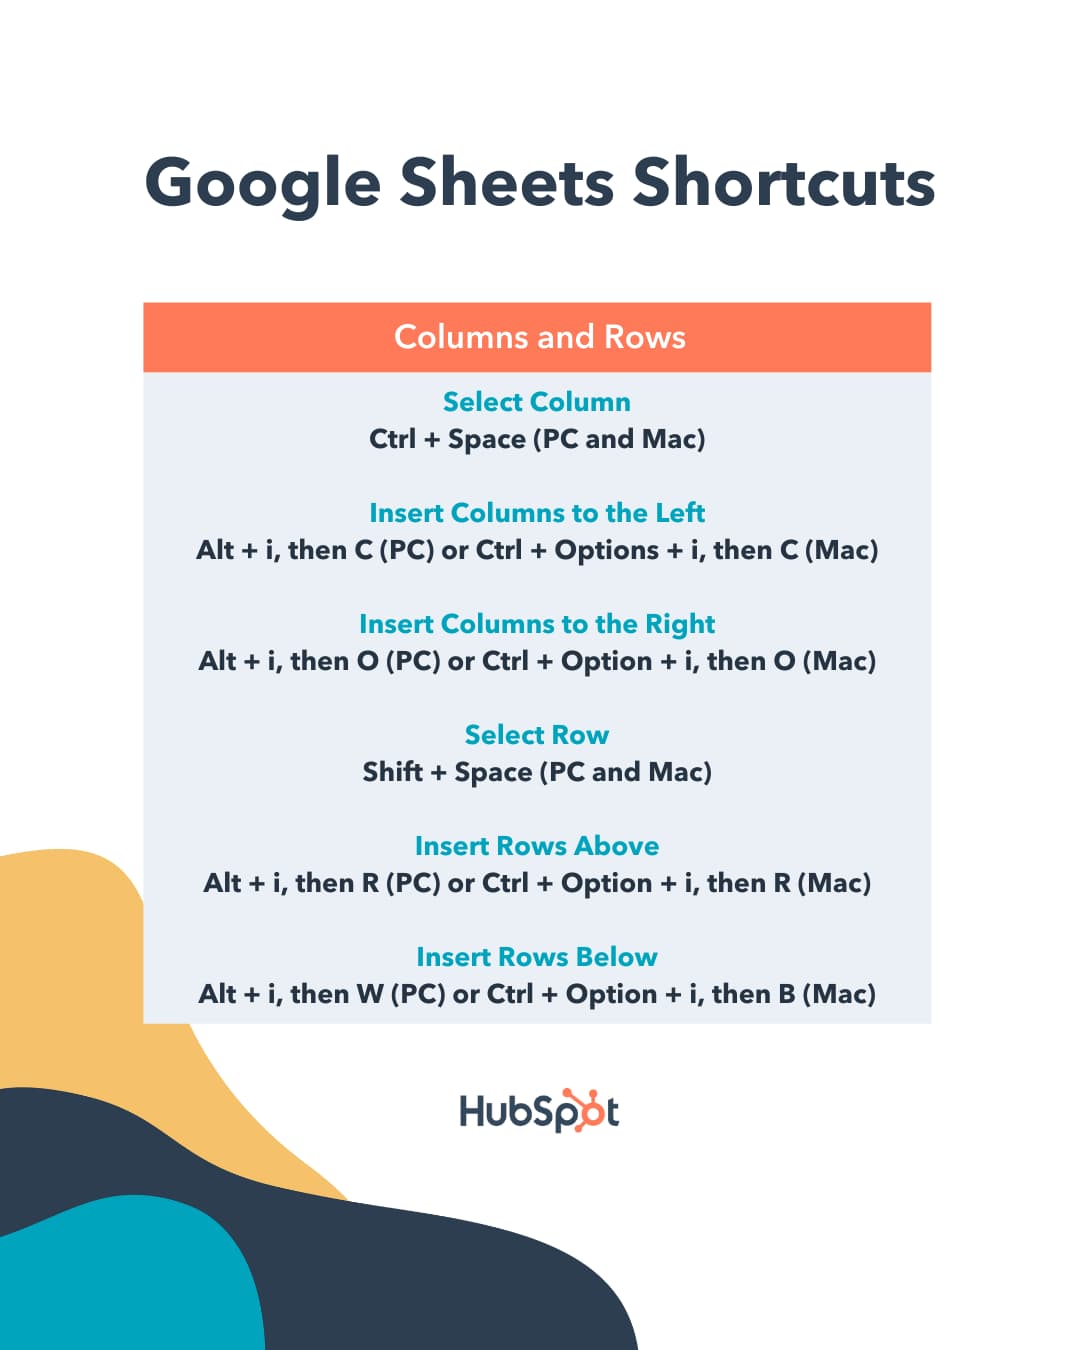 How to use Google Spreadsheets shortcuts to select columns, insert left or right columns, select row, and select rows above or below. 